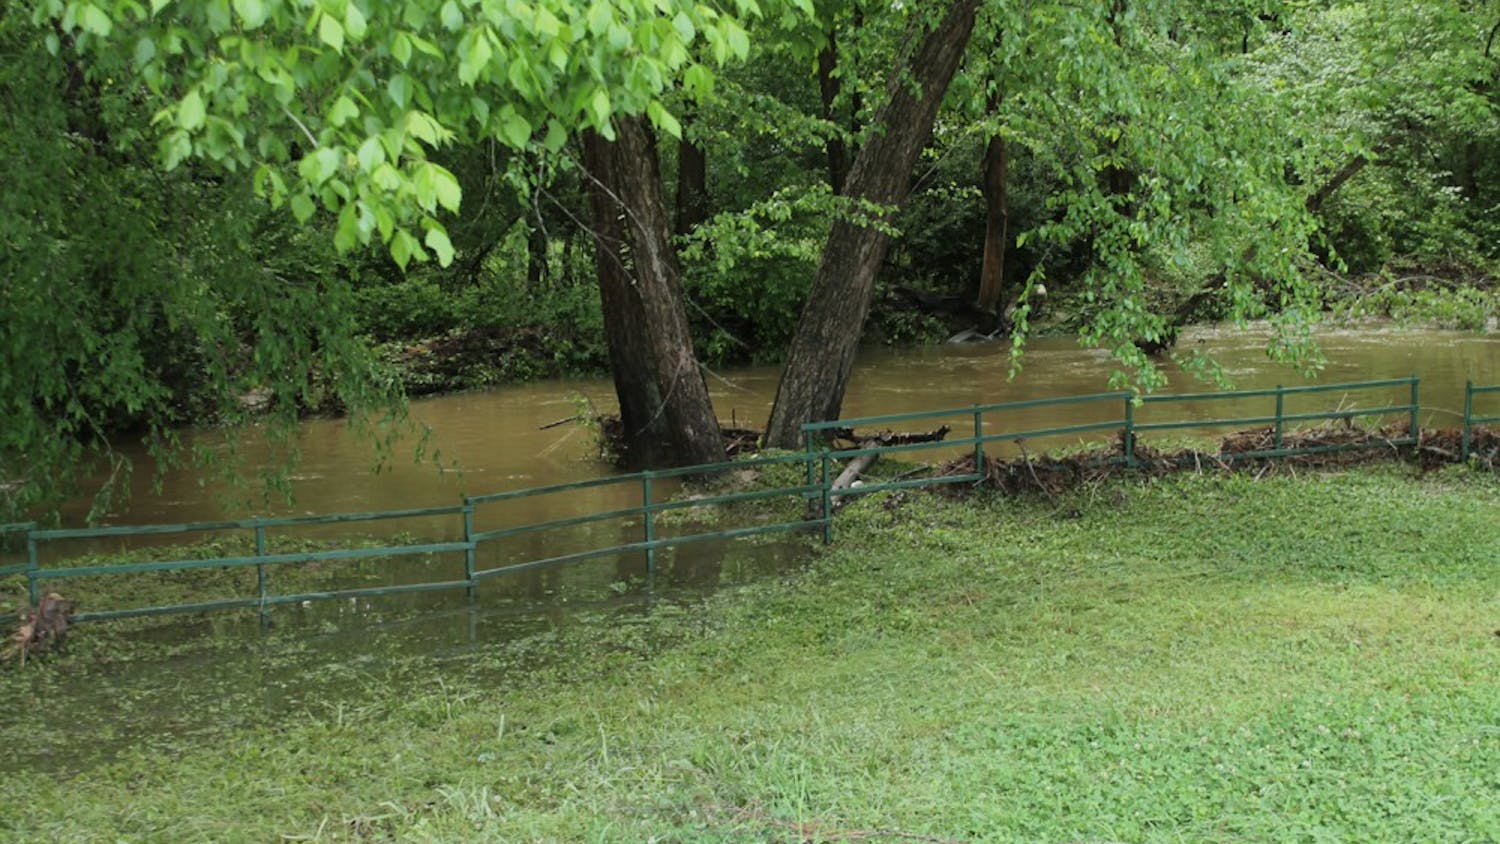 Flooding occurred with the excessive amounts of rain over the past few days around Chapel Hill.